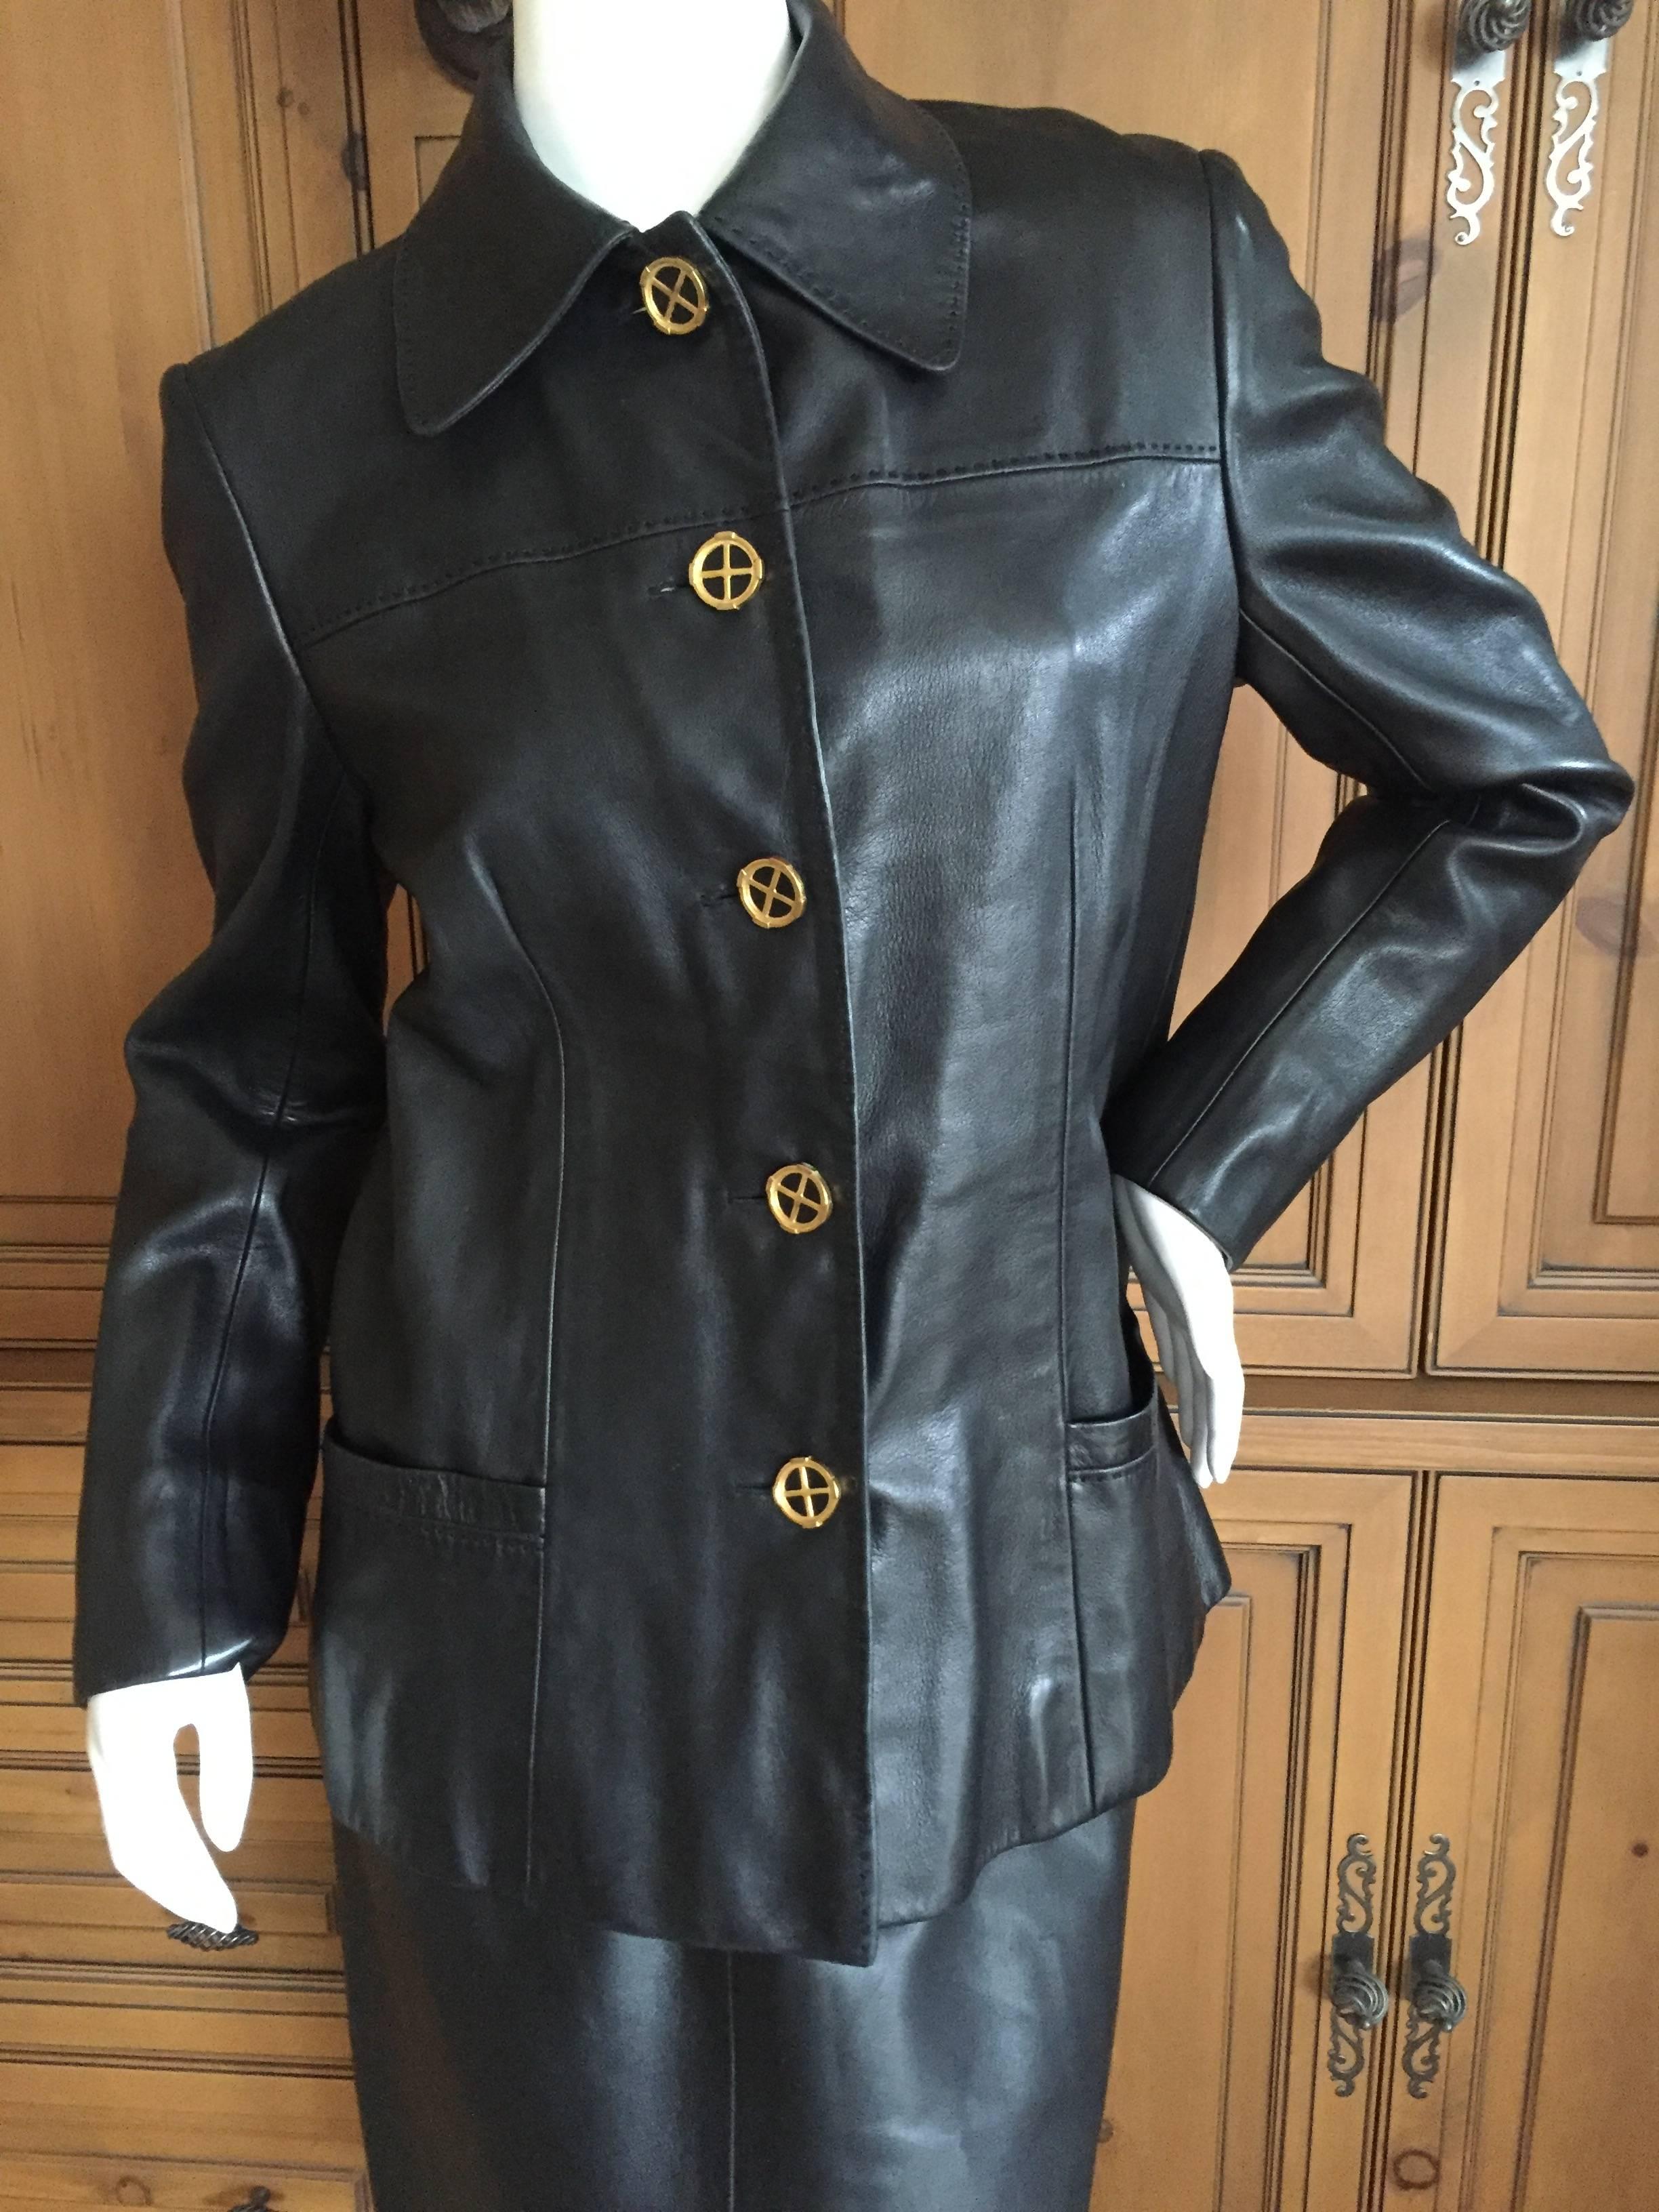 Luxurious black lambskin leather skirt suit from Hermes circa 1970.

This is a really special vintage suit. Leather insert buttons, this is fully lined in Hermes silk scarf fabric. Finished with top stitching , it is such a pretty jacket.
Even